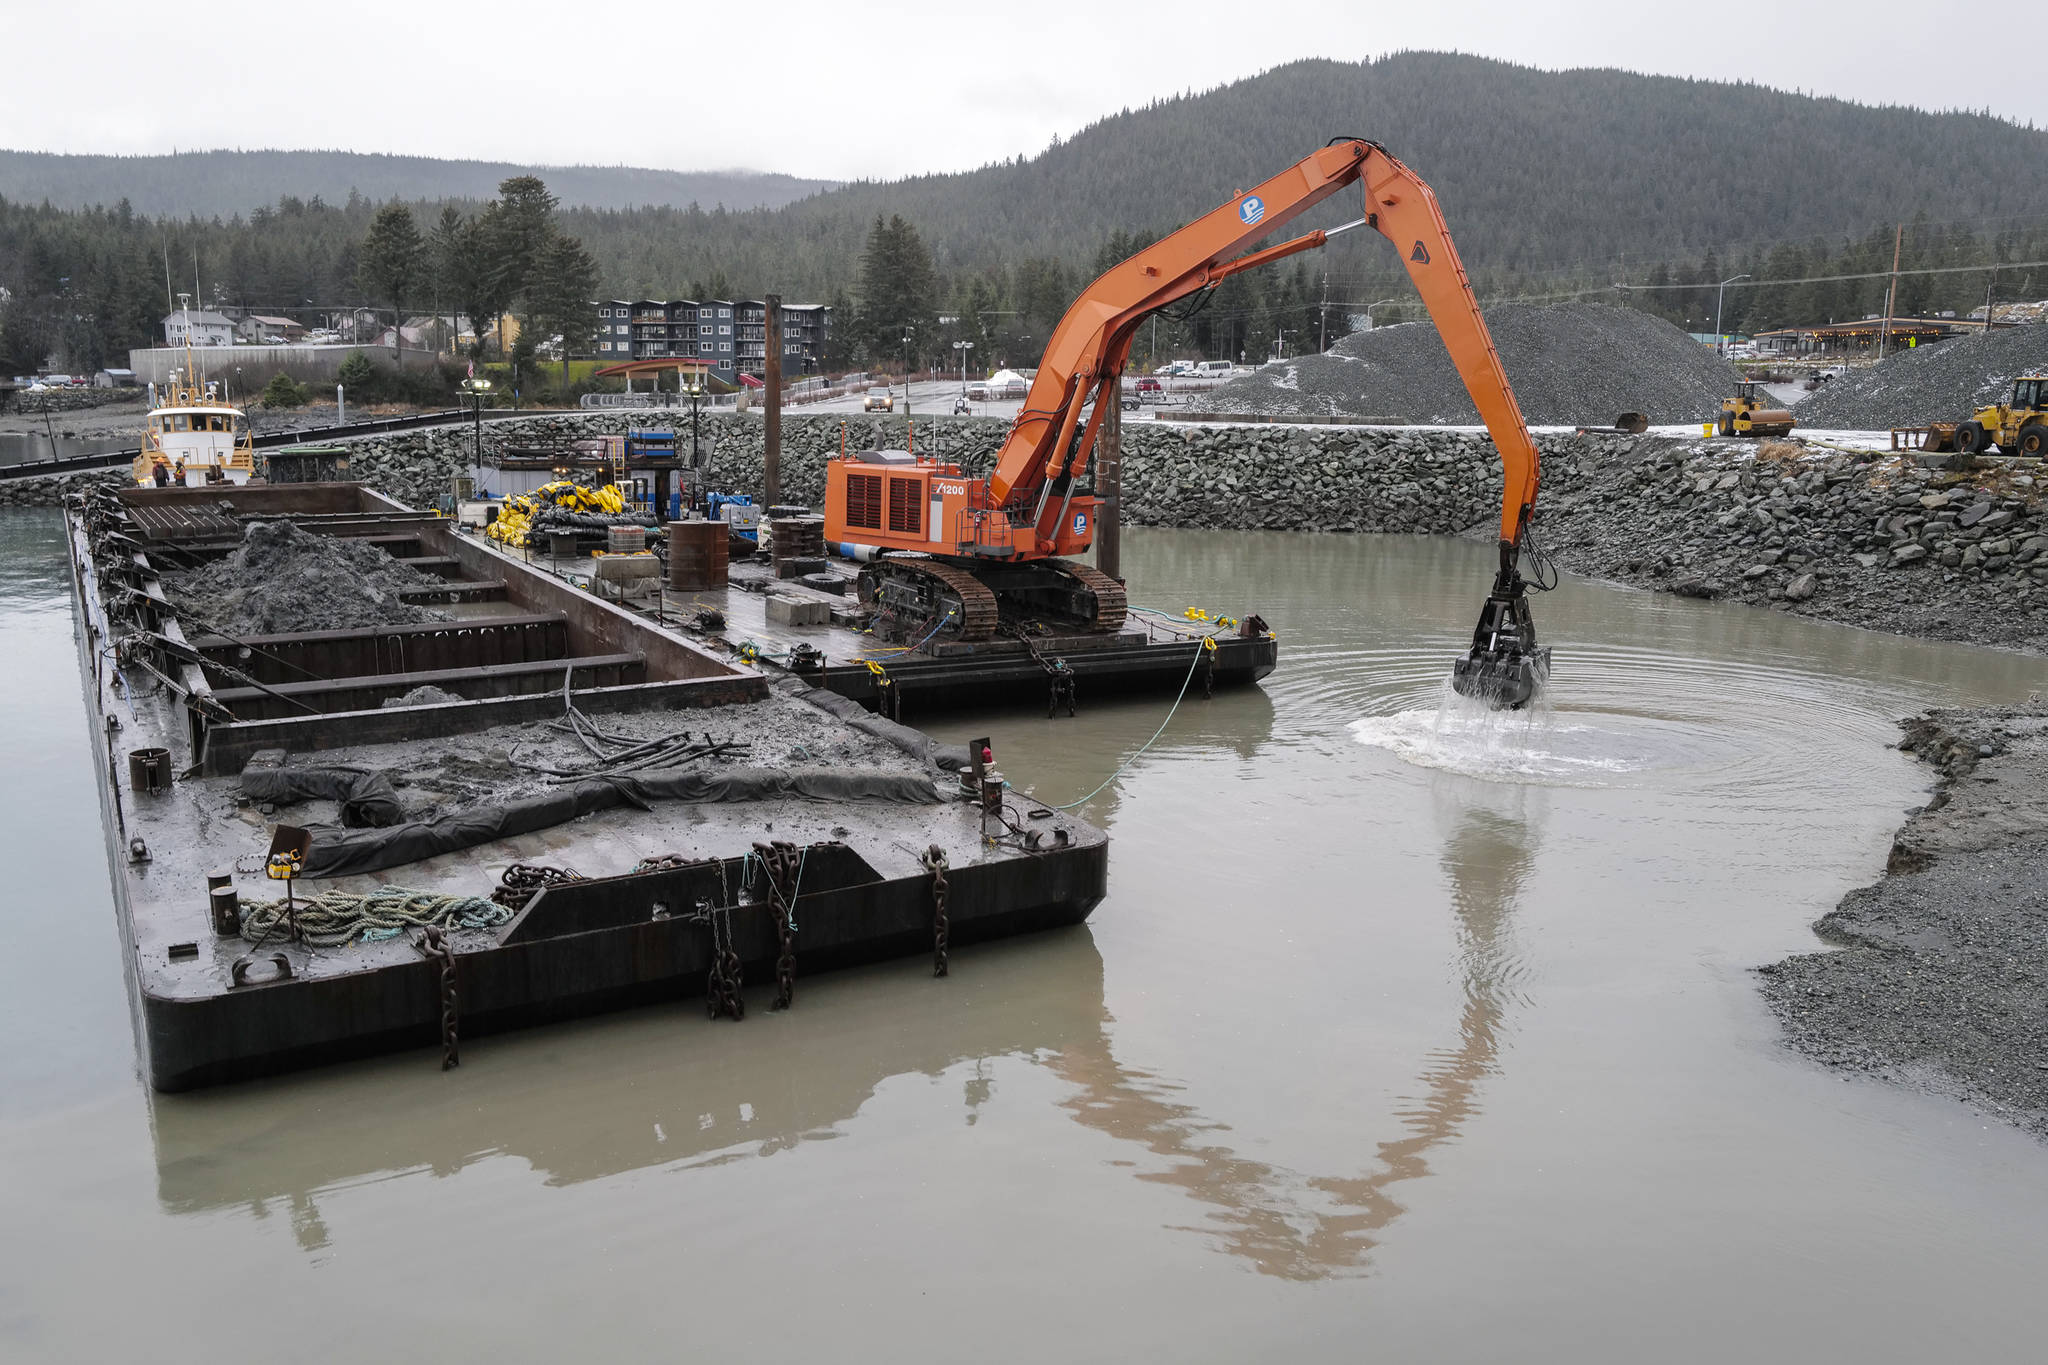 Dredging continues in the basin at the Don D. Statter Memorial Boat Harbor in Auke Bay on Wednesday, Dec. 18, 2019. The area will be used to construct floats for the charter vessel fleet. The floats will be in use by the whale watching charters in May of 2021. (Michael Penn | Juneau Empire)